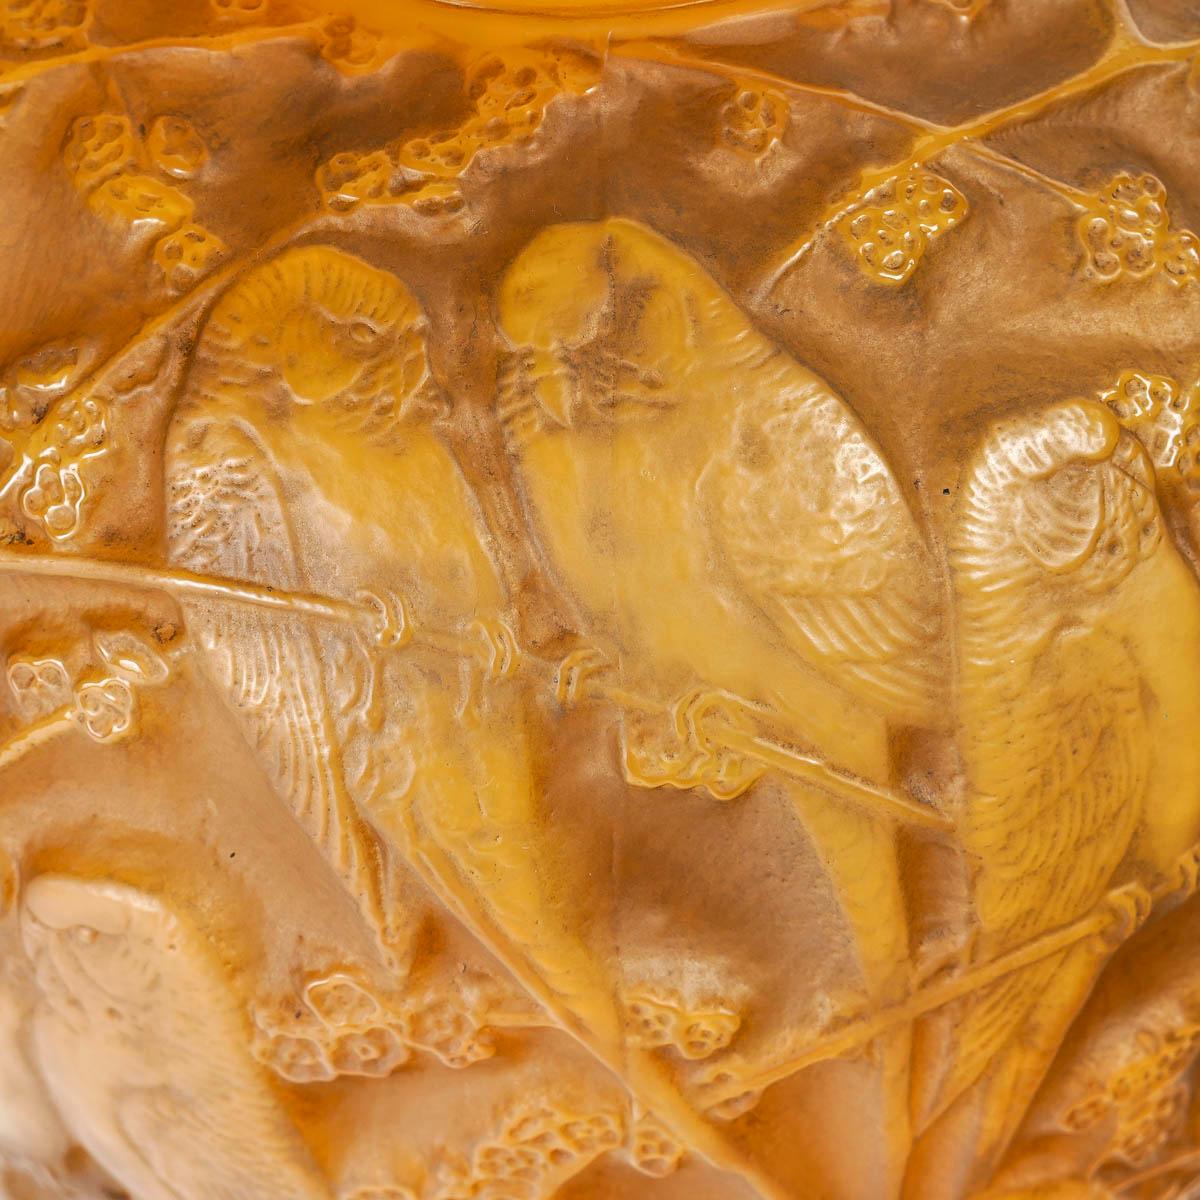 French 1919 Rene Lalique Vase Perruches Cased Butterscotch Glass with Sepia Patina For Sale